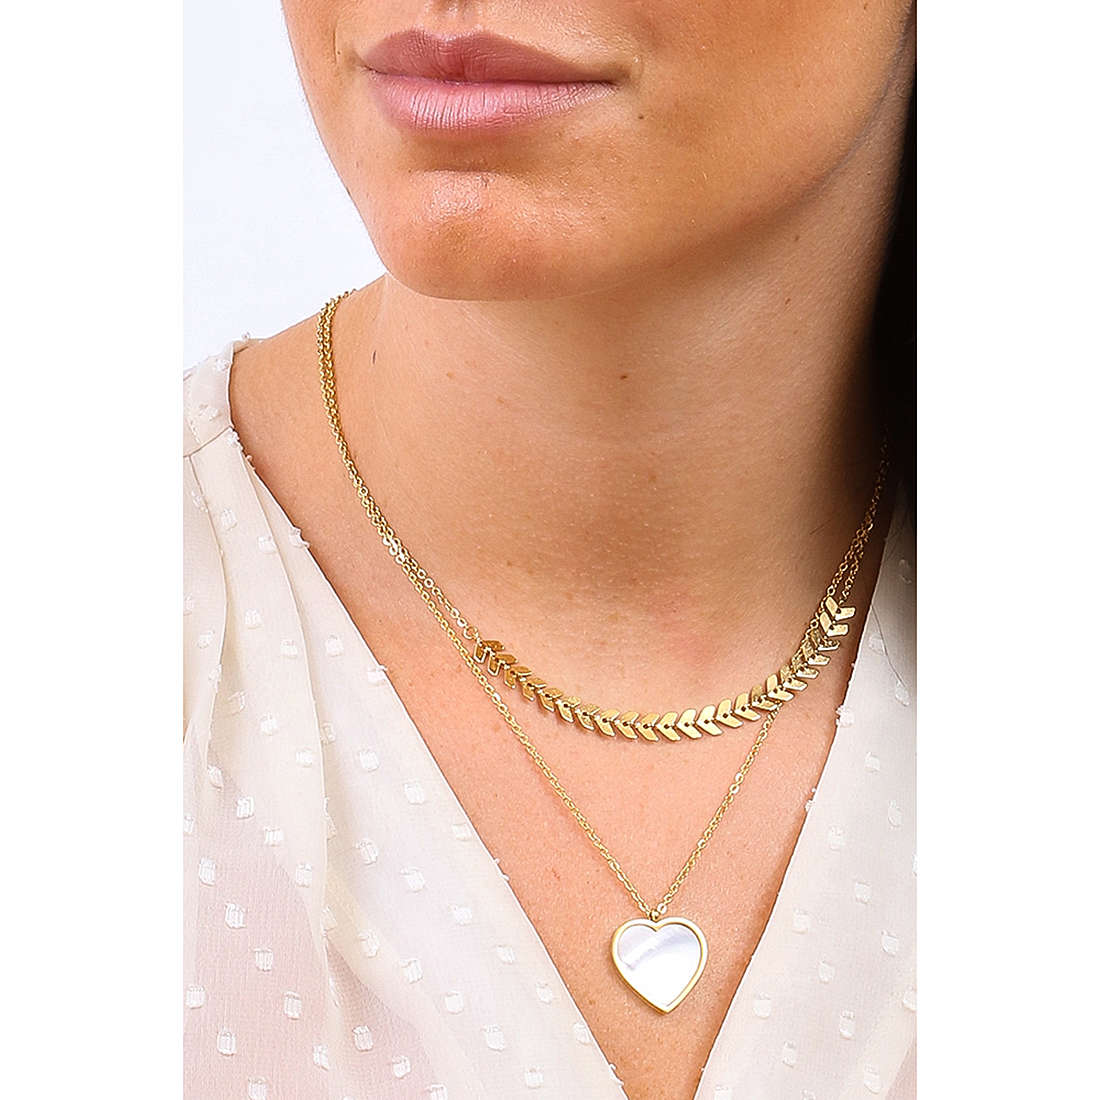 Lylium necklaces Pearly woman AC-C019G wearing